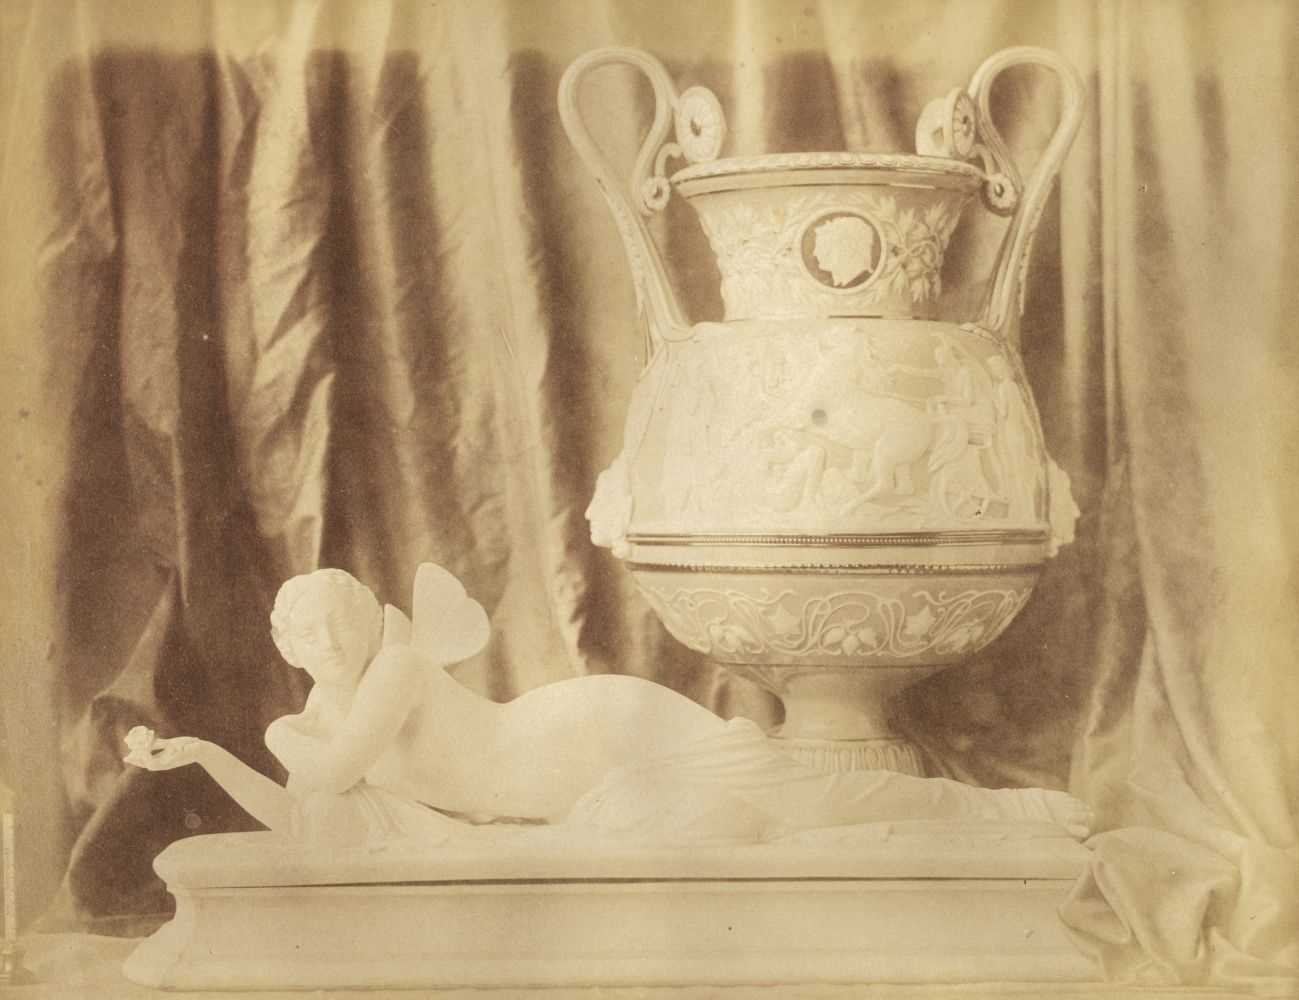 Porcelain from the Sèvres factory by Louis Remy Robert, circa 1855